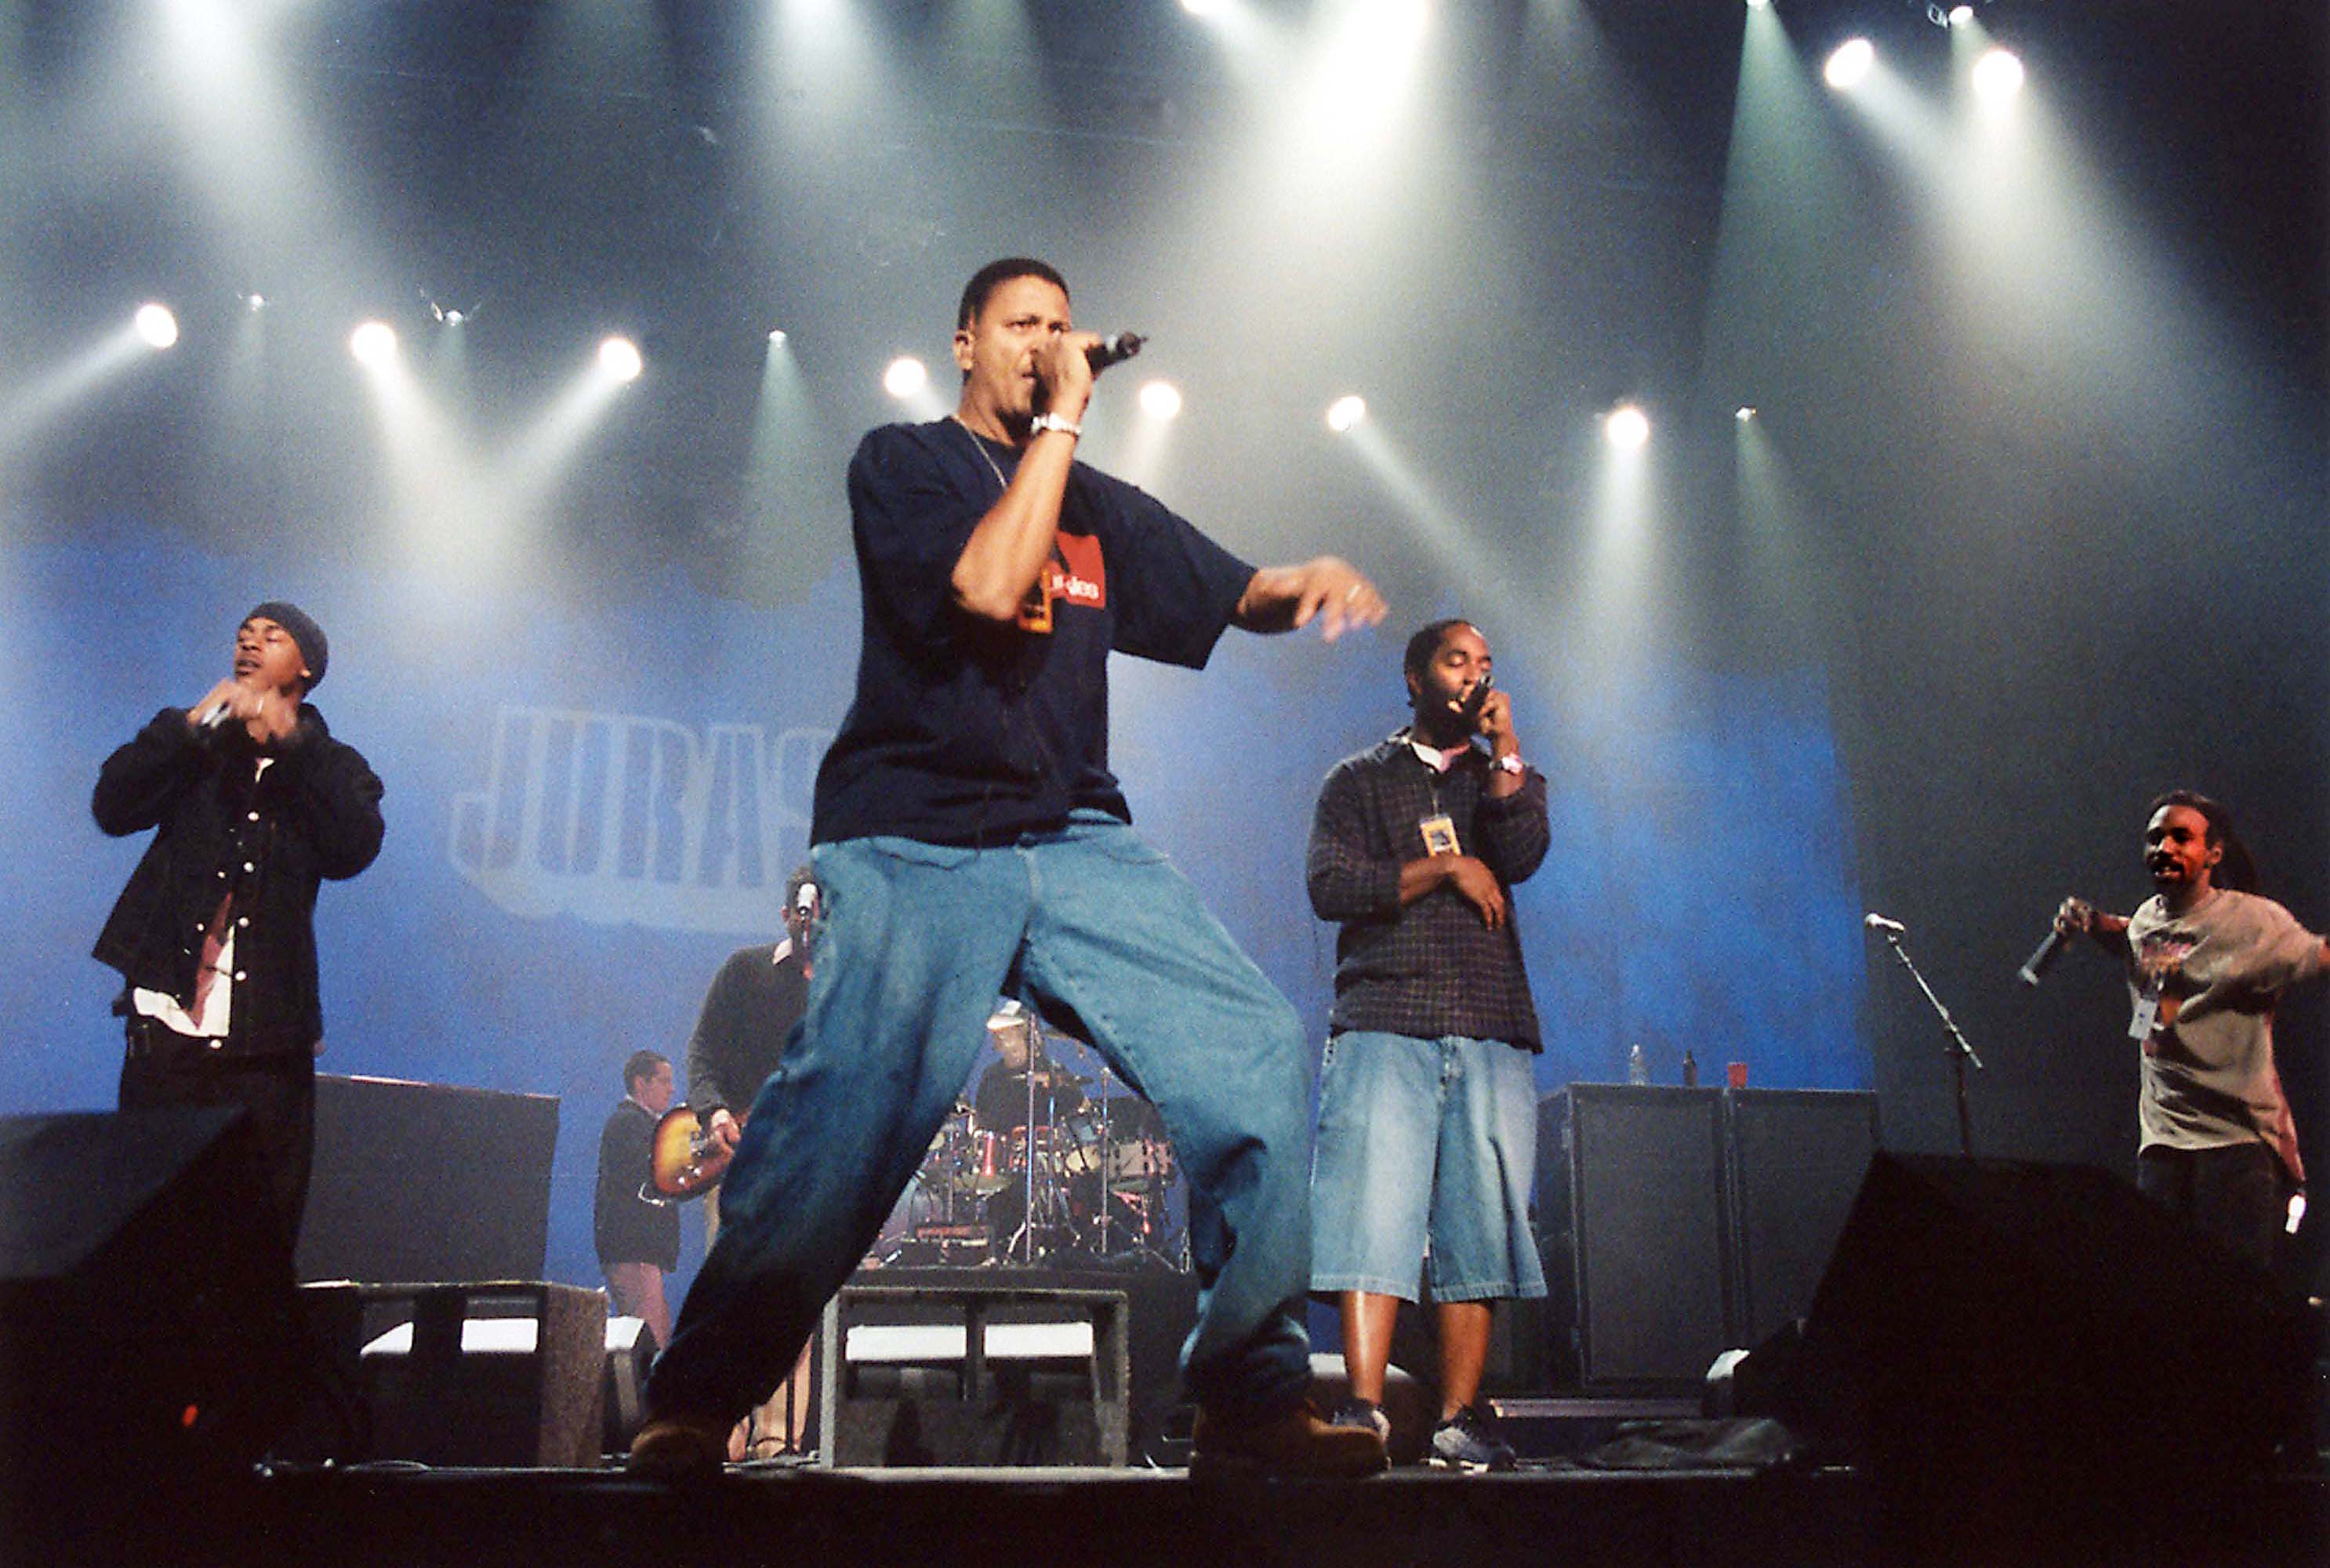 Great Expectations: An Oral History of Jurassic 5's <i></noscript>
<h2></h2>
<h2><strong>Reception</strong></h2>
<p> </p>
<p><strong>Dan Dalton:</strong> There was a lot of pressure on whether or not we were going to change. That I remember. We answered the calling and nobody bailed. Nobody thought we sold out. We were still Jurassic 5, just with better distribution and a better team.</p>
<p><strong>Cut Chemist:</strong> We wanted to do it our way and this was the result, which were better results than most people get from doing it your way on a major record label. I think we may be the shining example, the best-case scenario, of having your cake and kind of eating it, too. The machine got behind it and we had 100% creative control. Usually, when you have 100% creative control they’re like, “Fuck this record,” and they’re not going to work it.</p>
<p><strong>Soup:</strong> It was a slow burn. It didn’t take off. And at that time, first week sales was a big thing. We didn’t place high, but we didn’t place low. I’m looking at Billboard right now. We went to 43 and R&B/hip hop albums we were at 33. We were above 50. It would have been dope if we were like 10 or something, but that wasn’t bad… We just wanted to come out. We didn’t know nothing about first-week sales and we didn’t care anything about that. That was for the record label to worry about.</p>
<p><strong>Cut Chemist:</strong> The weird thing about the success of “Quality Control” is that I could feel the machine behind it. I was like, “This isn’t an organic thing.” It’s not the kind of song that is cracking on the mainstream. Yet it was on mainstream platforms. On Power 106 or 92.3 had “Quality Control” going up against Jay-Z songs. And it was winning. I was like, “What?!” We were on some MTV show. It was on some <i>TRL-type</i> shit. Girls were dancing to “Quality Control” when we were up there performing and I was like, “This is surreal. This is weird. You guys don’t normally dance to shit that sounds like this.” It was cool, but it was so different from what was going on at the time.</p>
<p><strong>B+:</strong> There’s a lot of Good Lifers out there that would be delighted to point out to you that both Snoop Dogg and Bone Thugs-N-Harmony came through. But as far as groups that were concerned with the core tenets of The Good Life, I think it’s a fair point to be made that Jurassic had the most successful career.</p>
<p><strong>Marc 7:</strong> We’re still seeing residuals from the record to this day, so it’s doing alright. We were so busy. We toured for years. There’s not many groups that can go silent, go dark for five or six years and come back and just tour like nothing ever happened. We’re one of those groups that can do that.</p>
</p><div class=